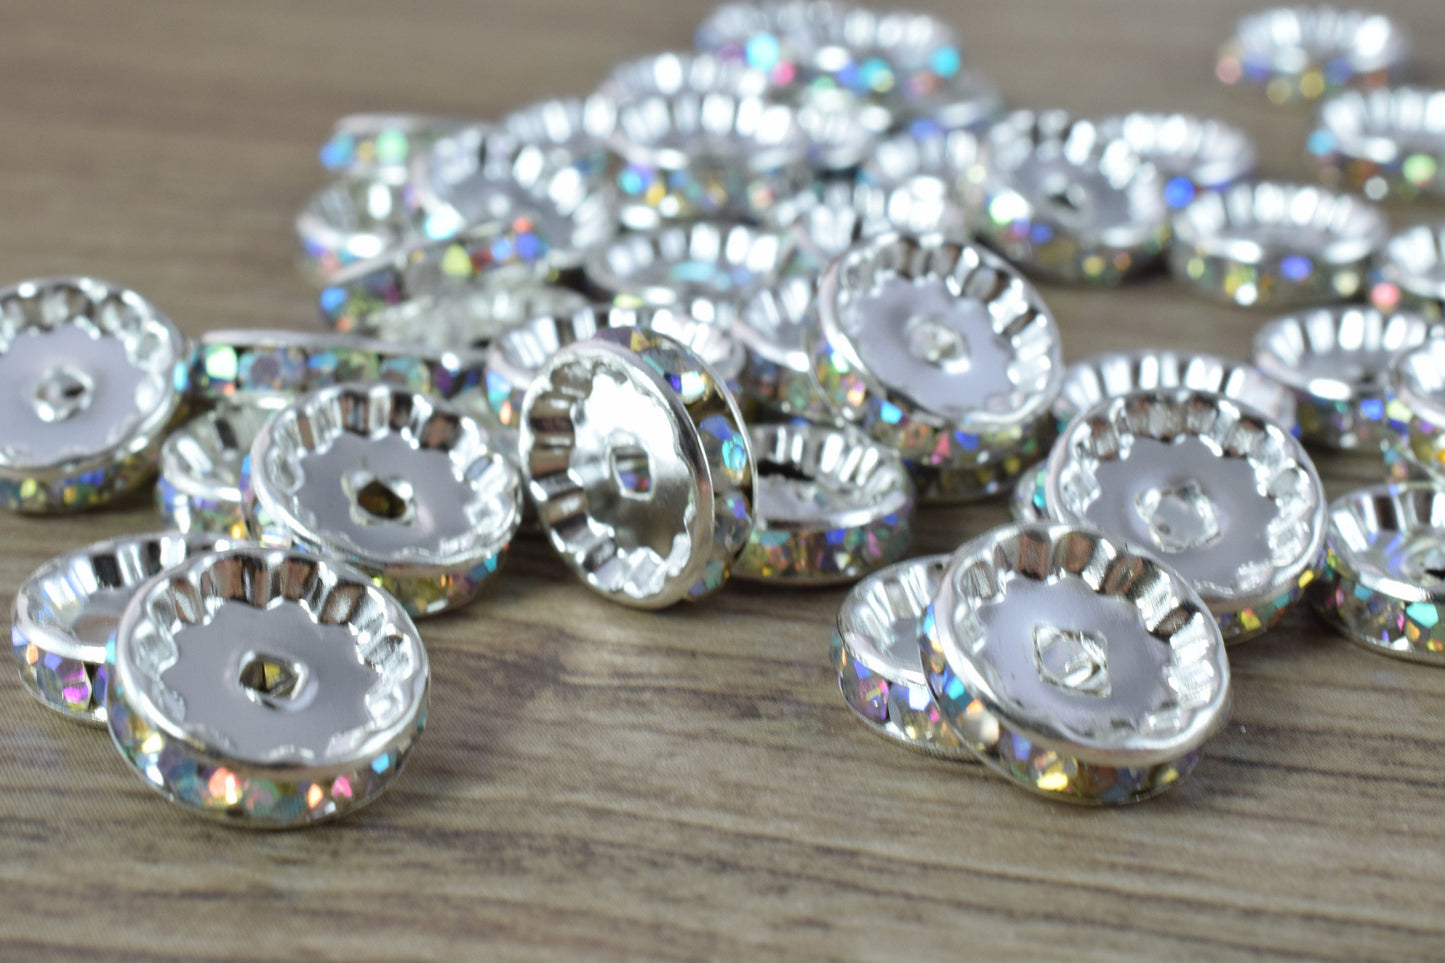 12mm Roundel AB Silver Beads with AB Clear Rhinestone,Best Quality Silver Rondelle Spacer beads Swarovski Crystal (Crystal AB)